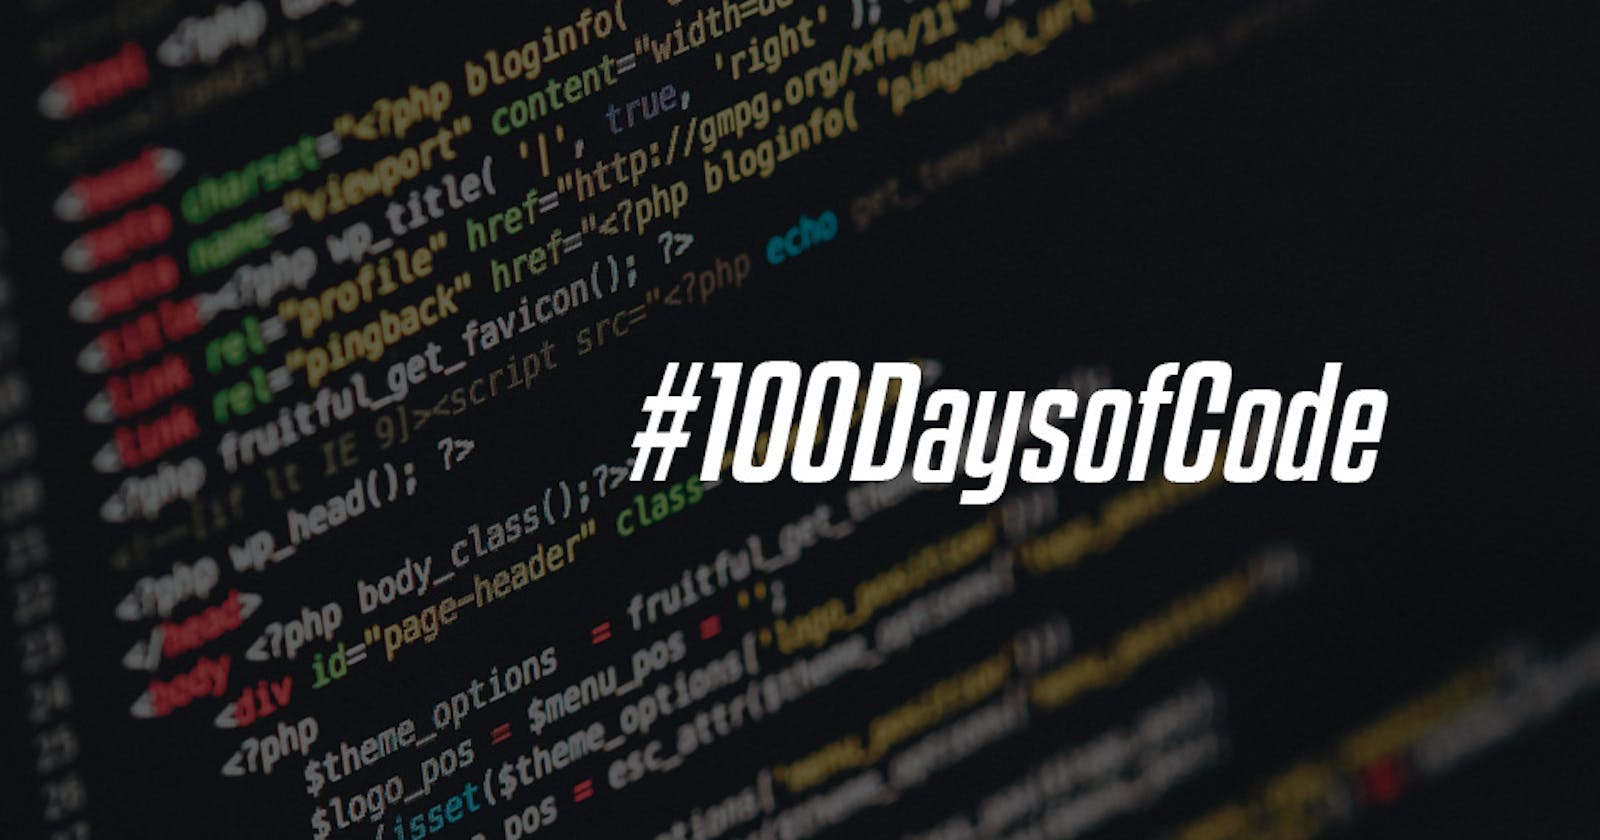 Starting 100 days of code challenge for the first time 🚀